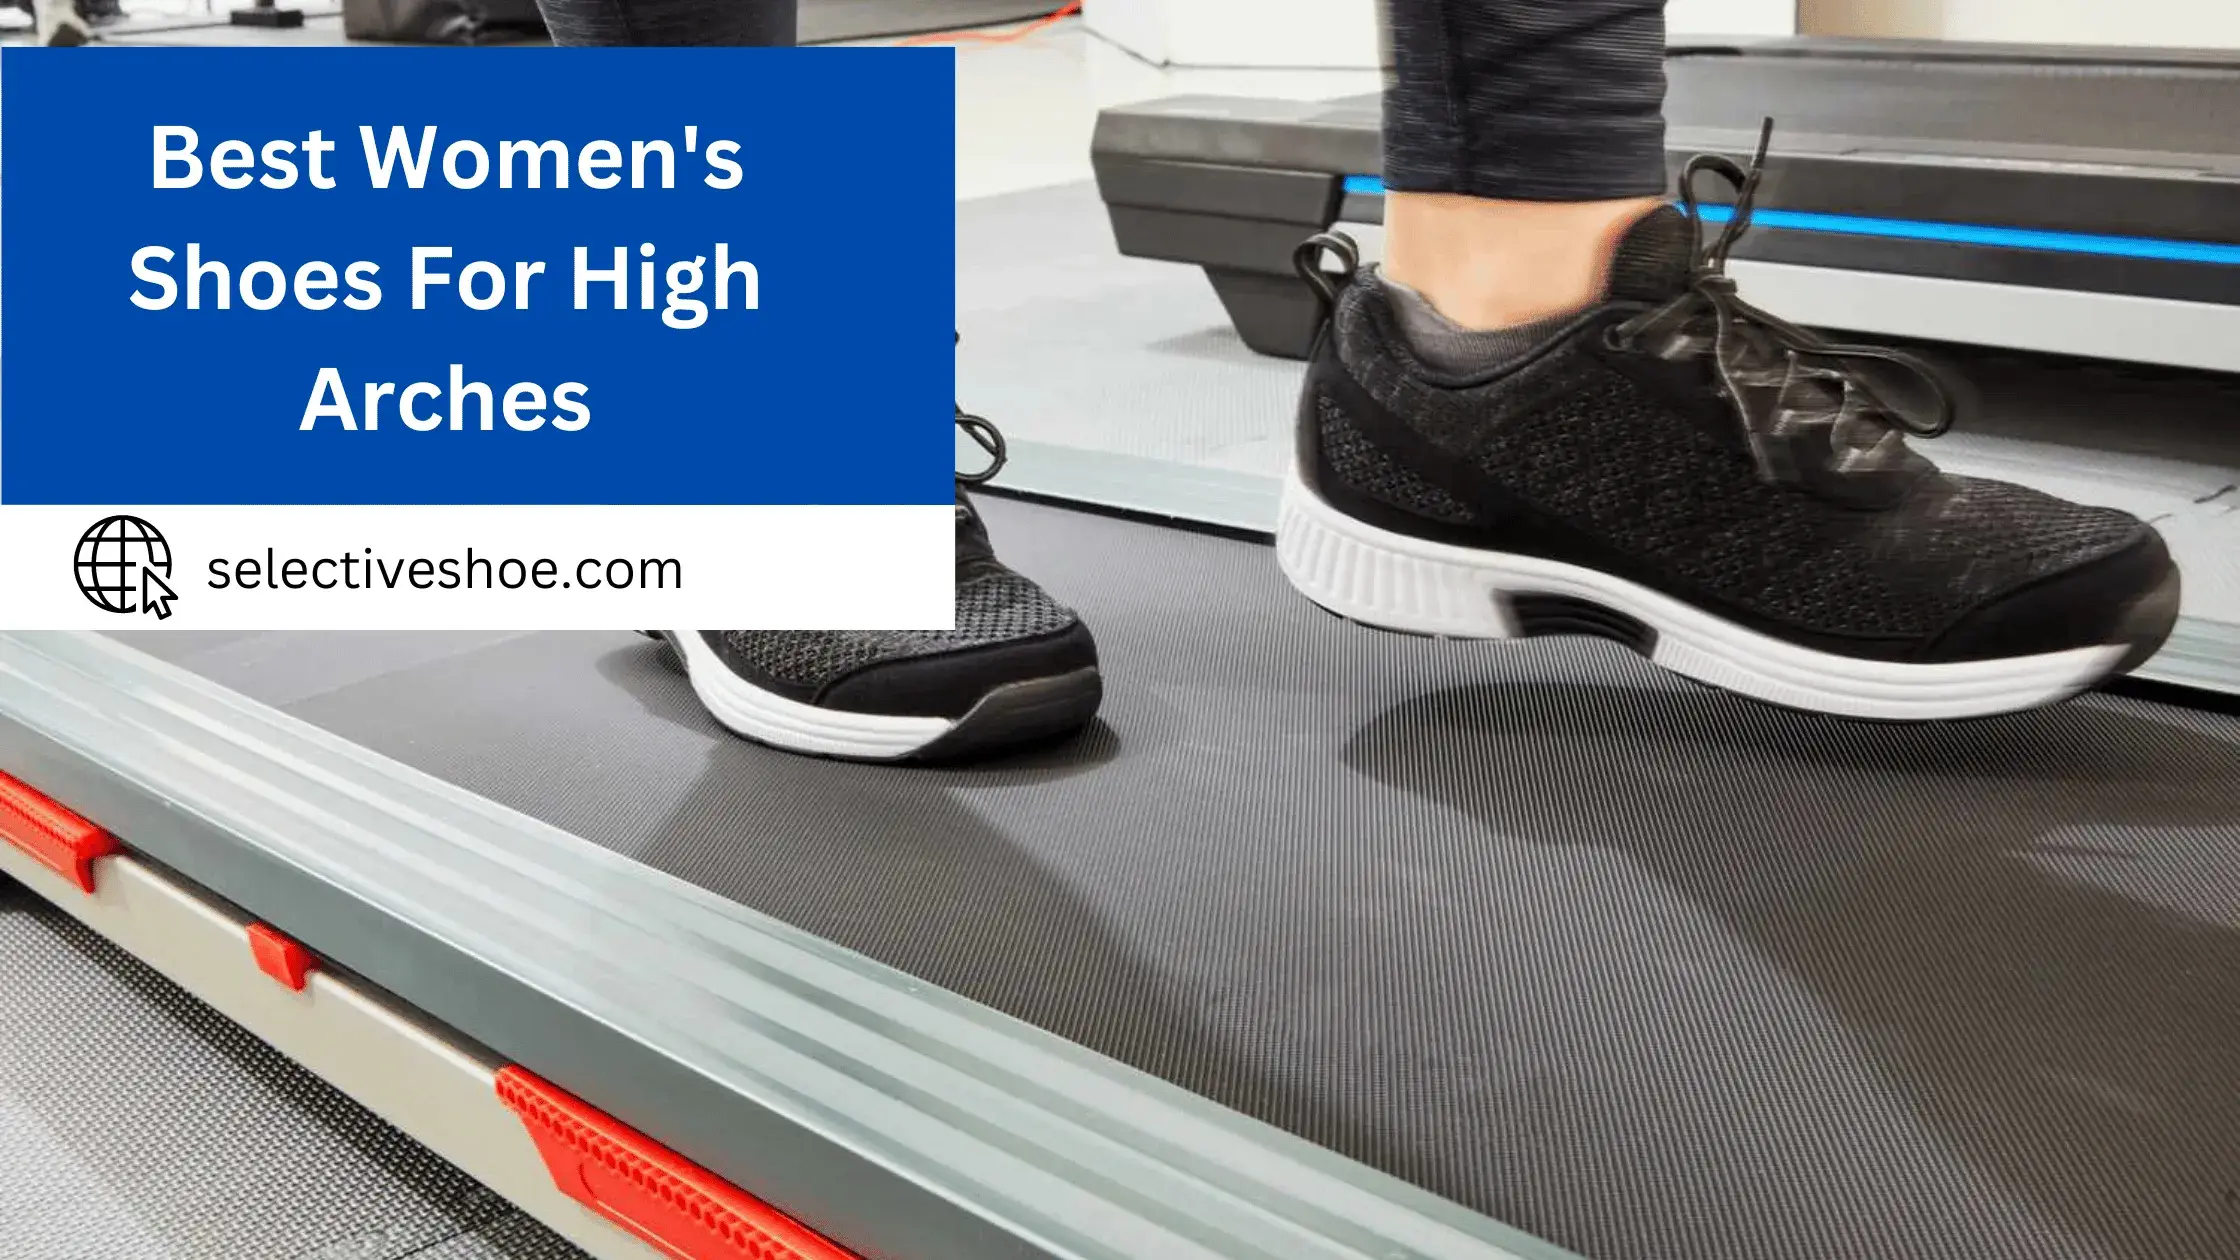 Best Women's Shoes For High Arches - A Comprehensive Guide